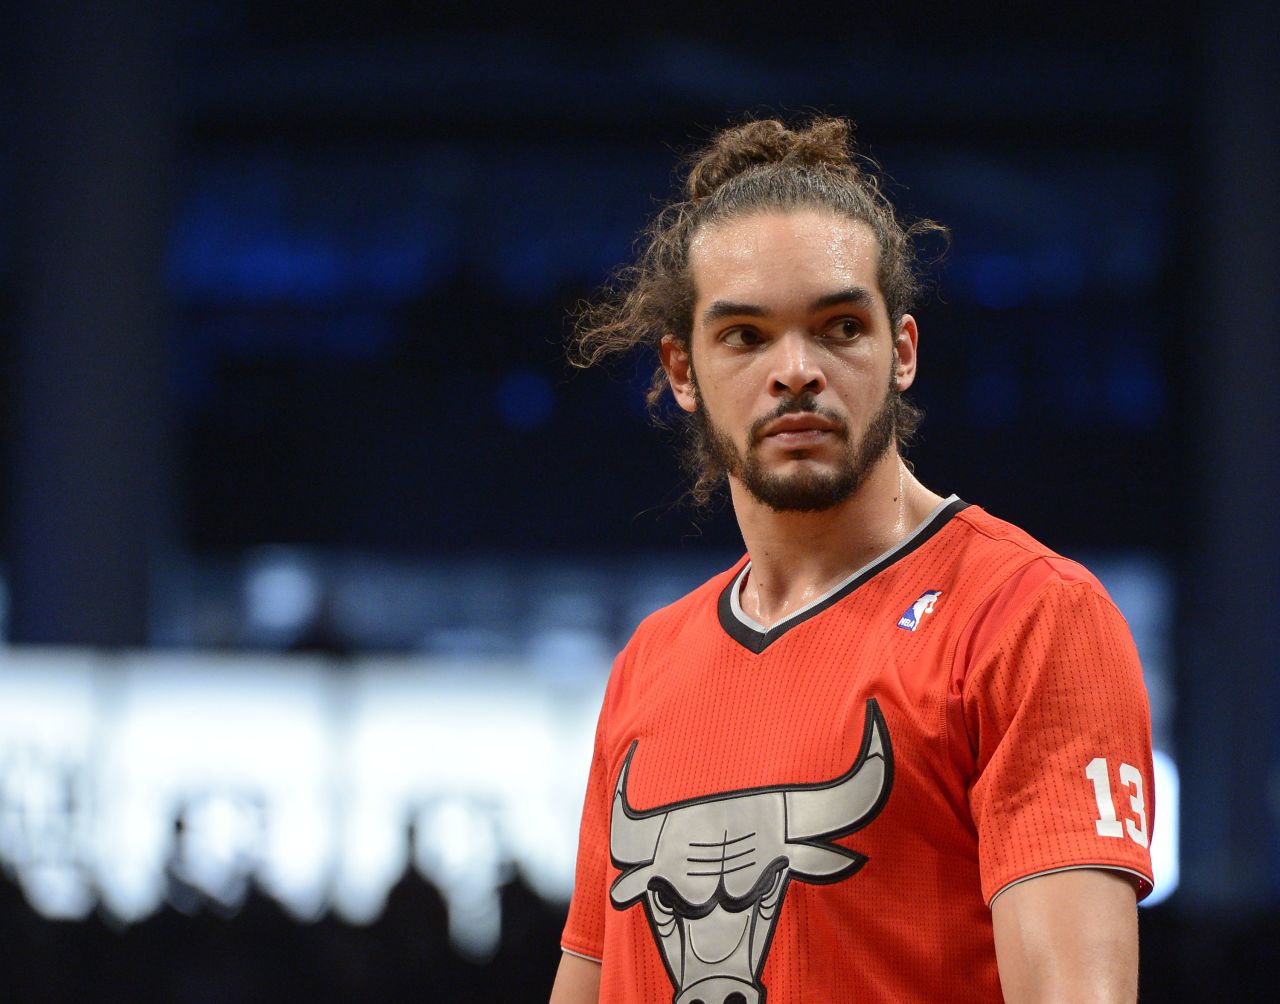 Joakim Noah of the Chicago Bulls has been sporting the Samurai top-knot look for years. Noah's father Yannick is a French former tennis champ known for his dreadlocks, and his mother was once Miss Sweden. 